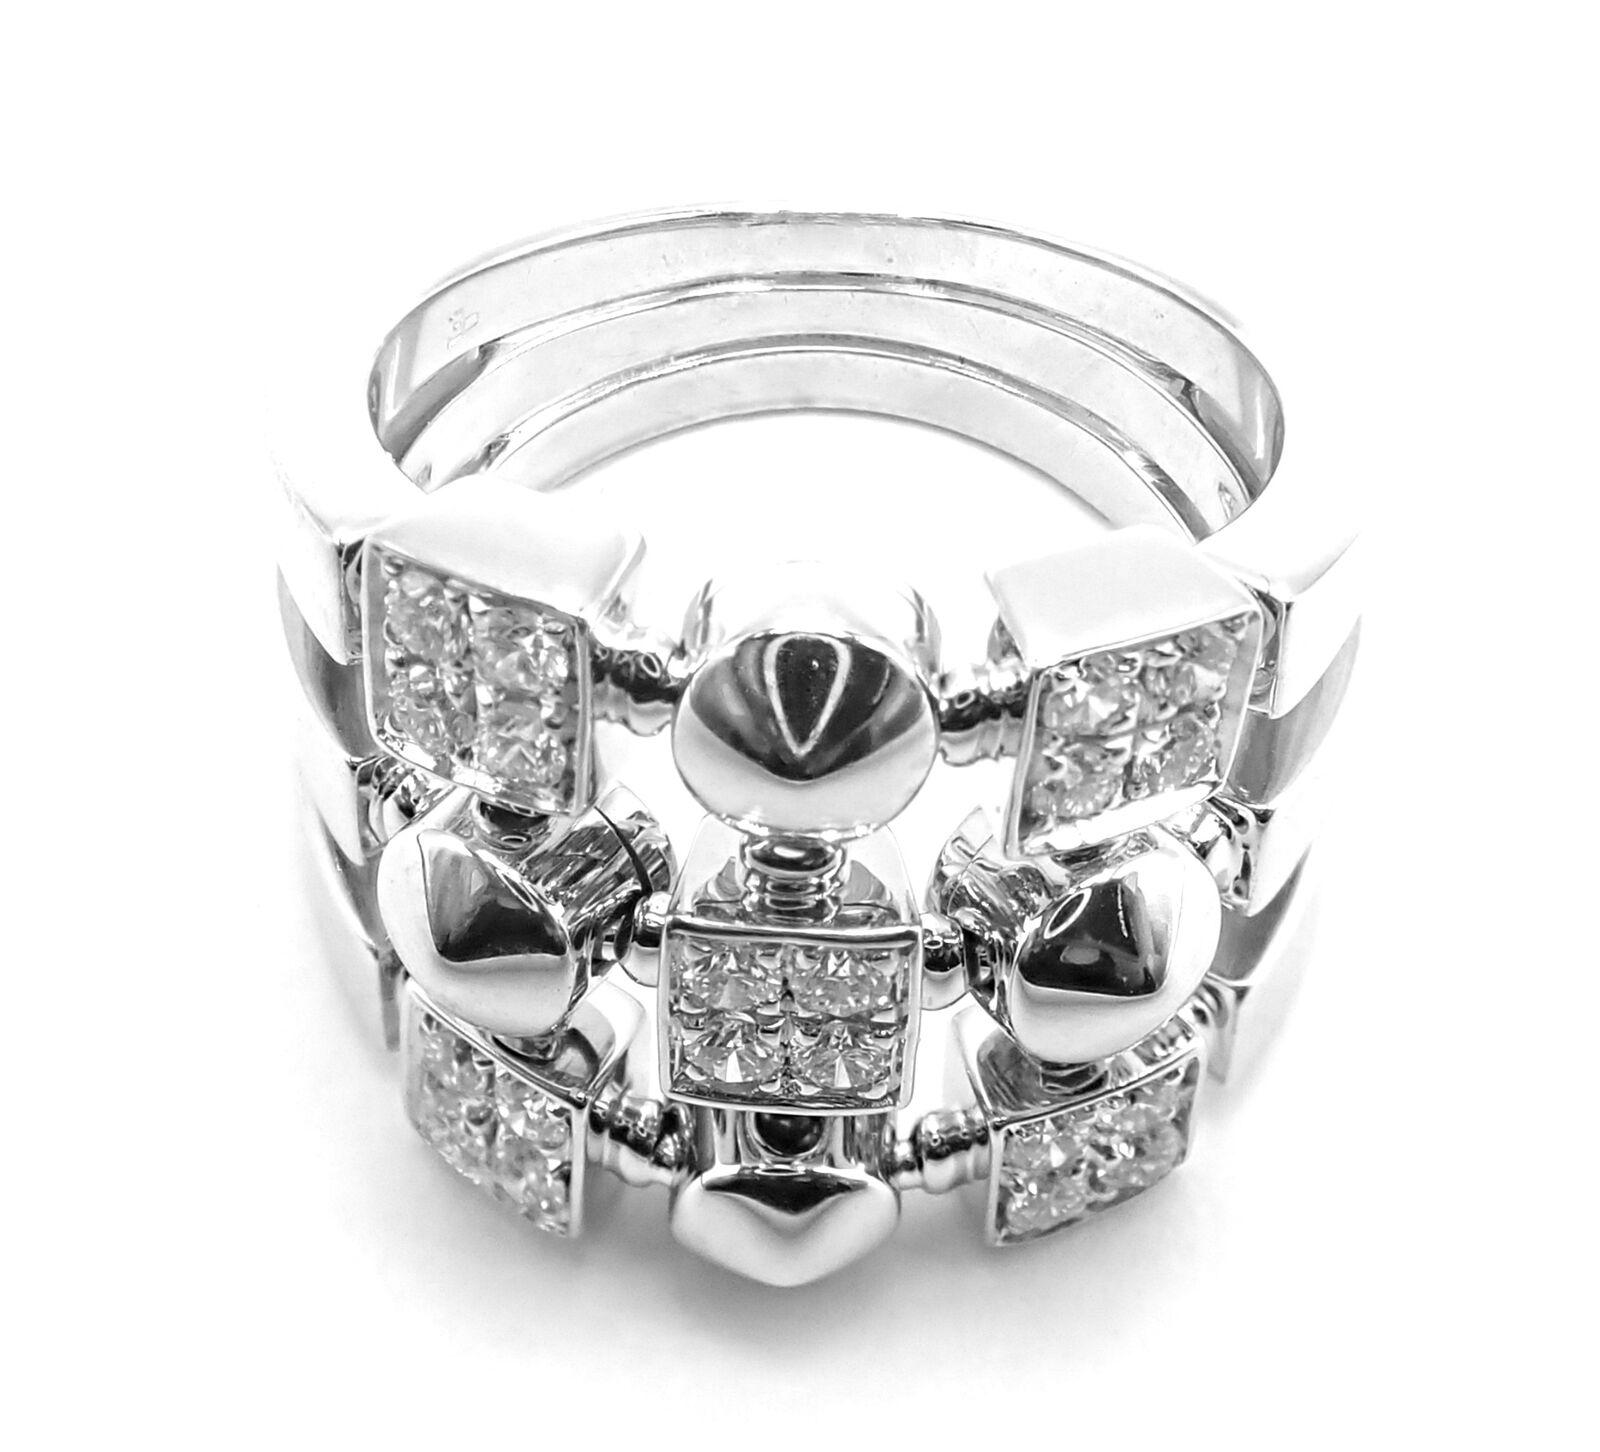 Bvlgari Bulgari Lucea Diamond White Gold Band Ring In Excellent Condition For Sale In Holland, PA